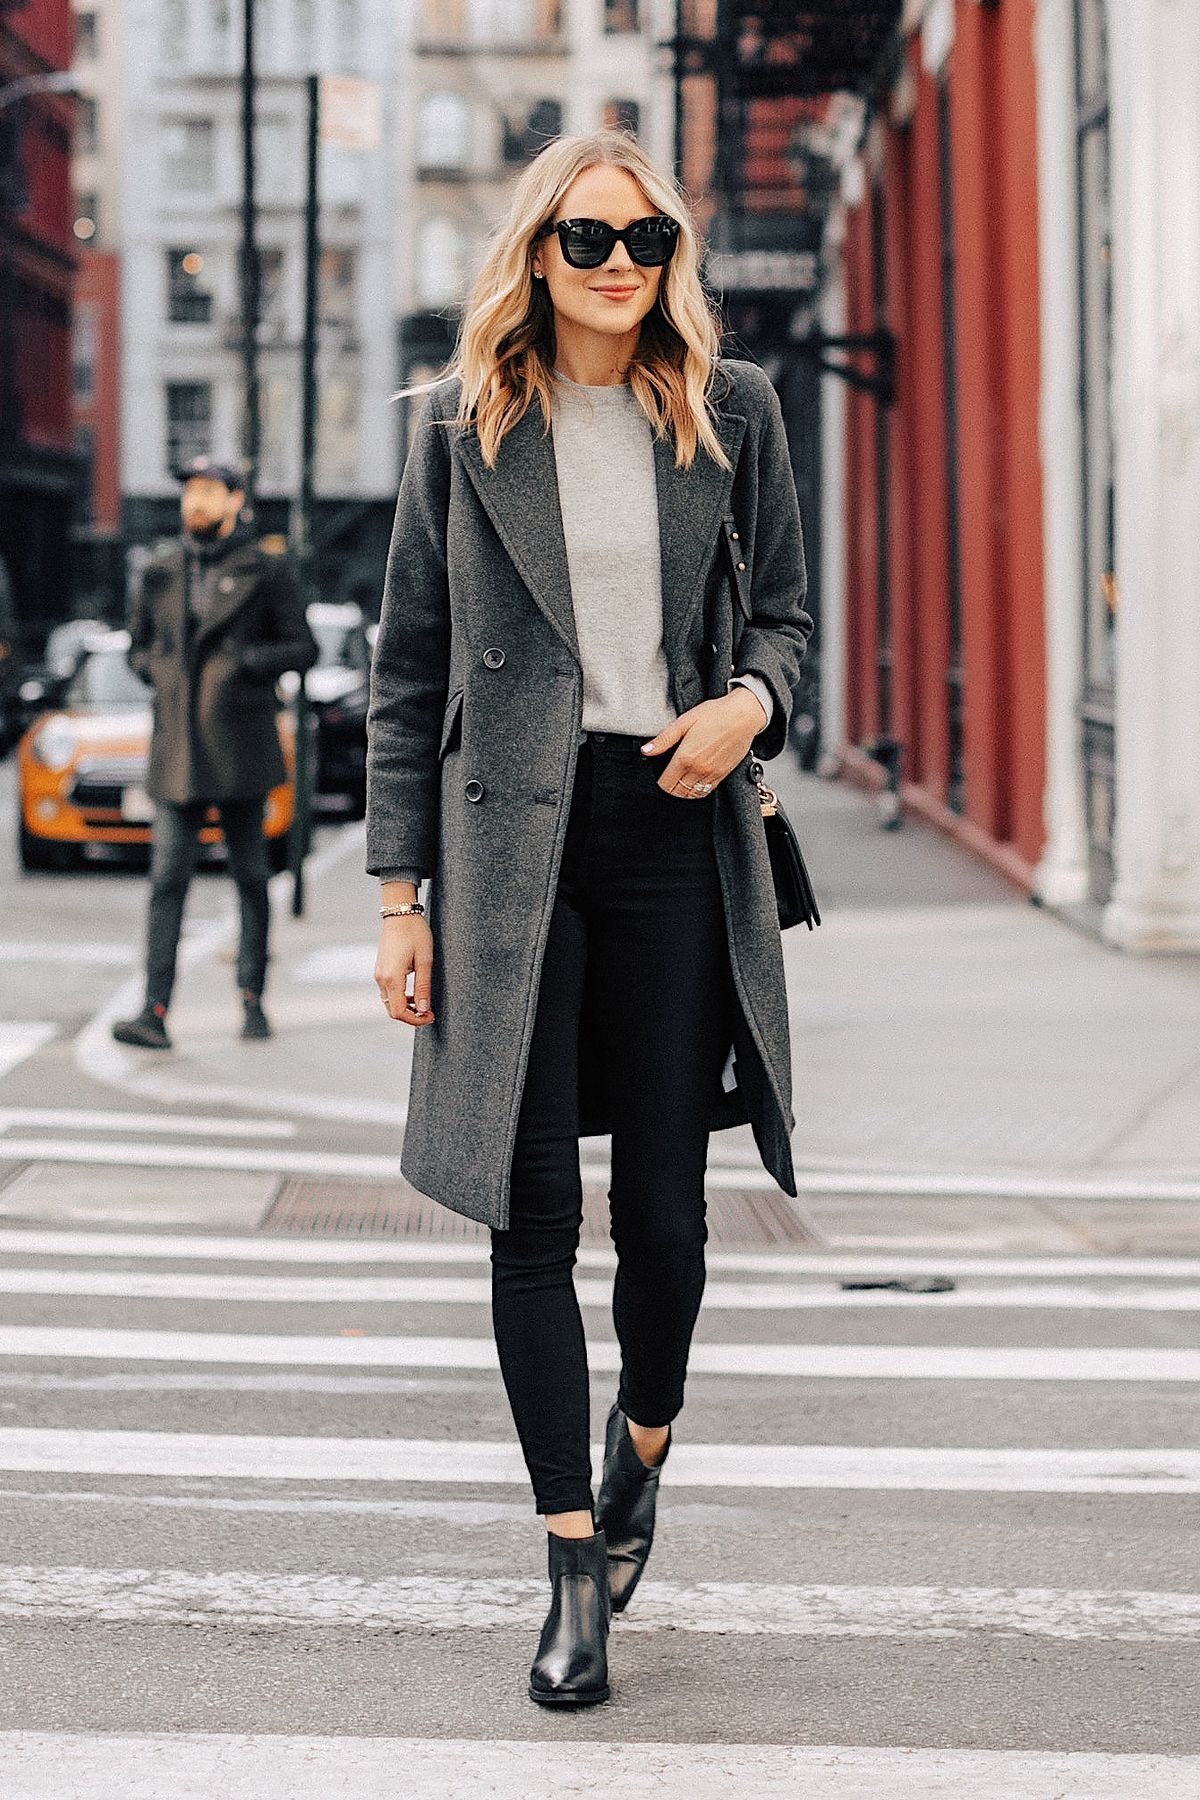 Winter Outfit in NYC | Fashion Jackson - Winter Outfit in NYC | Fashion Jackson -   19 style Classic winter ideas